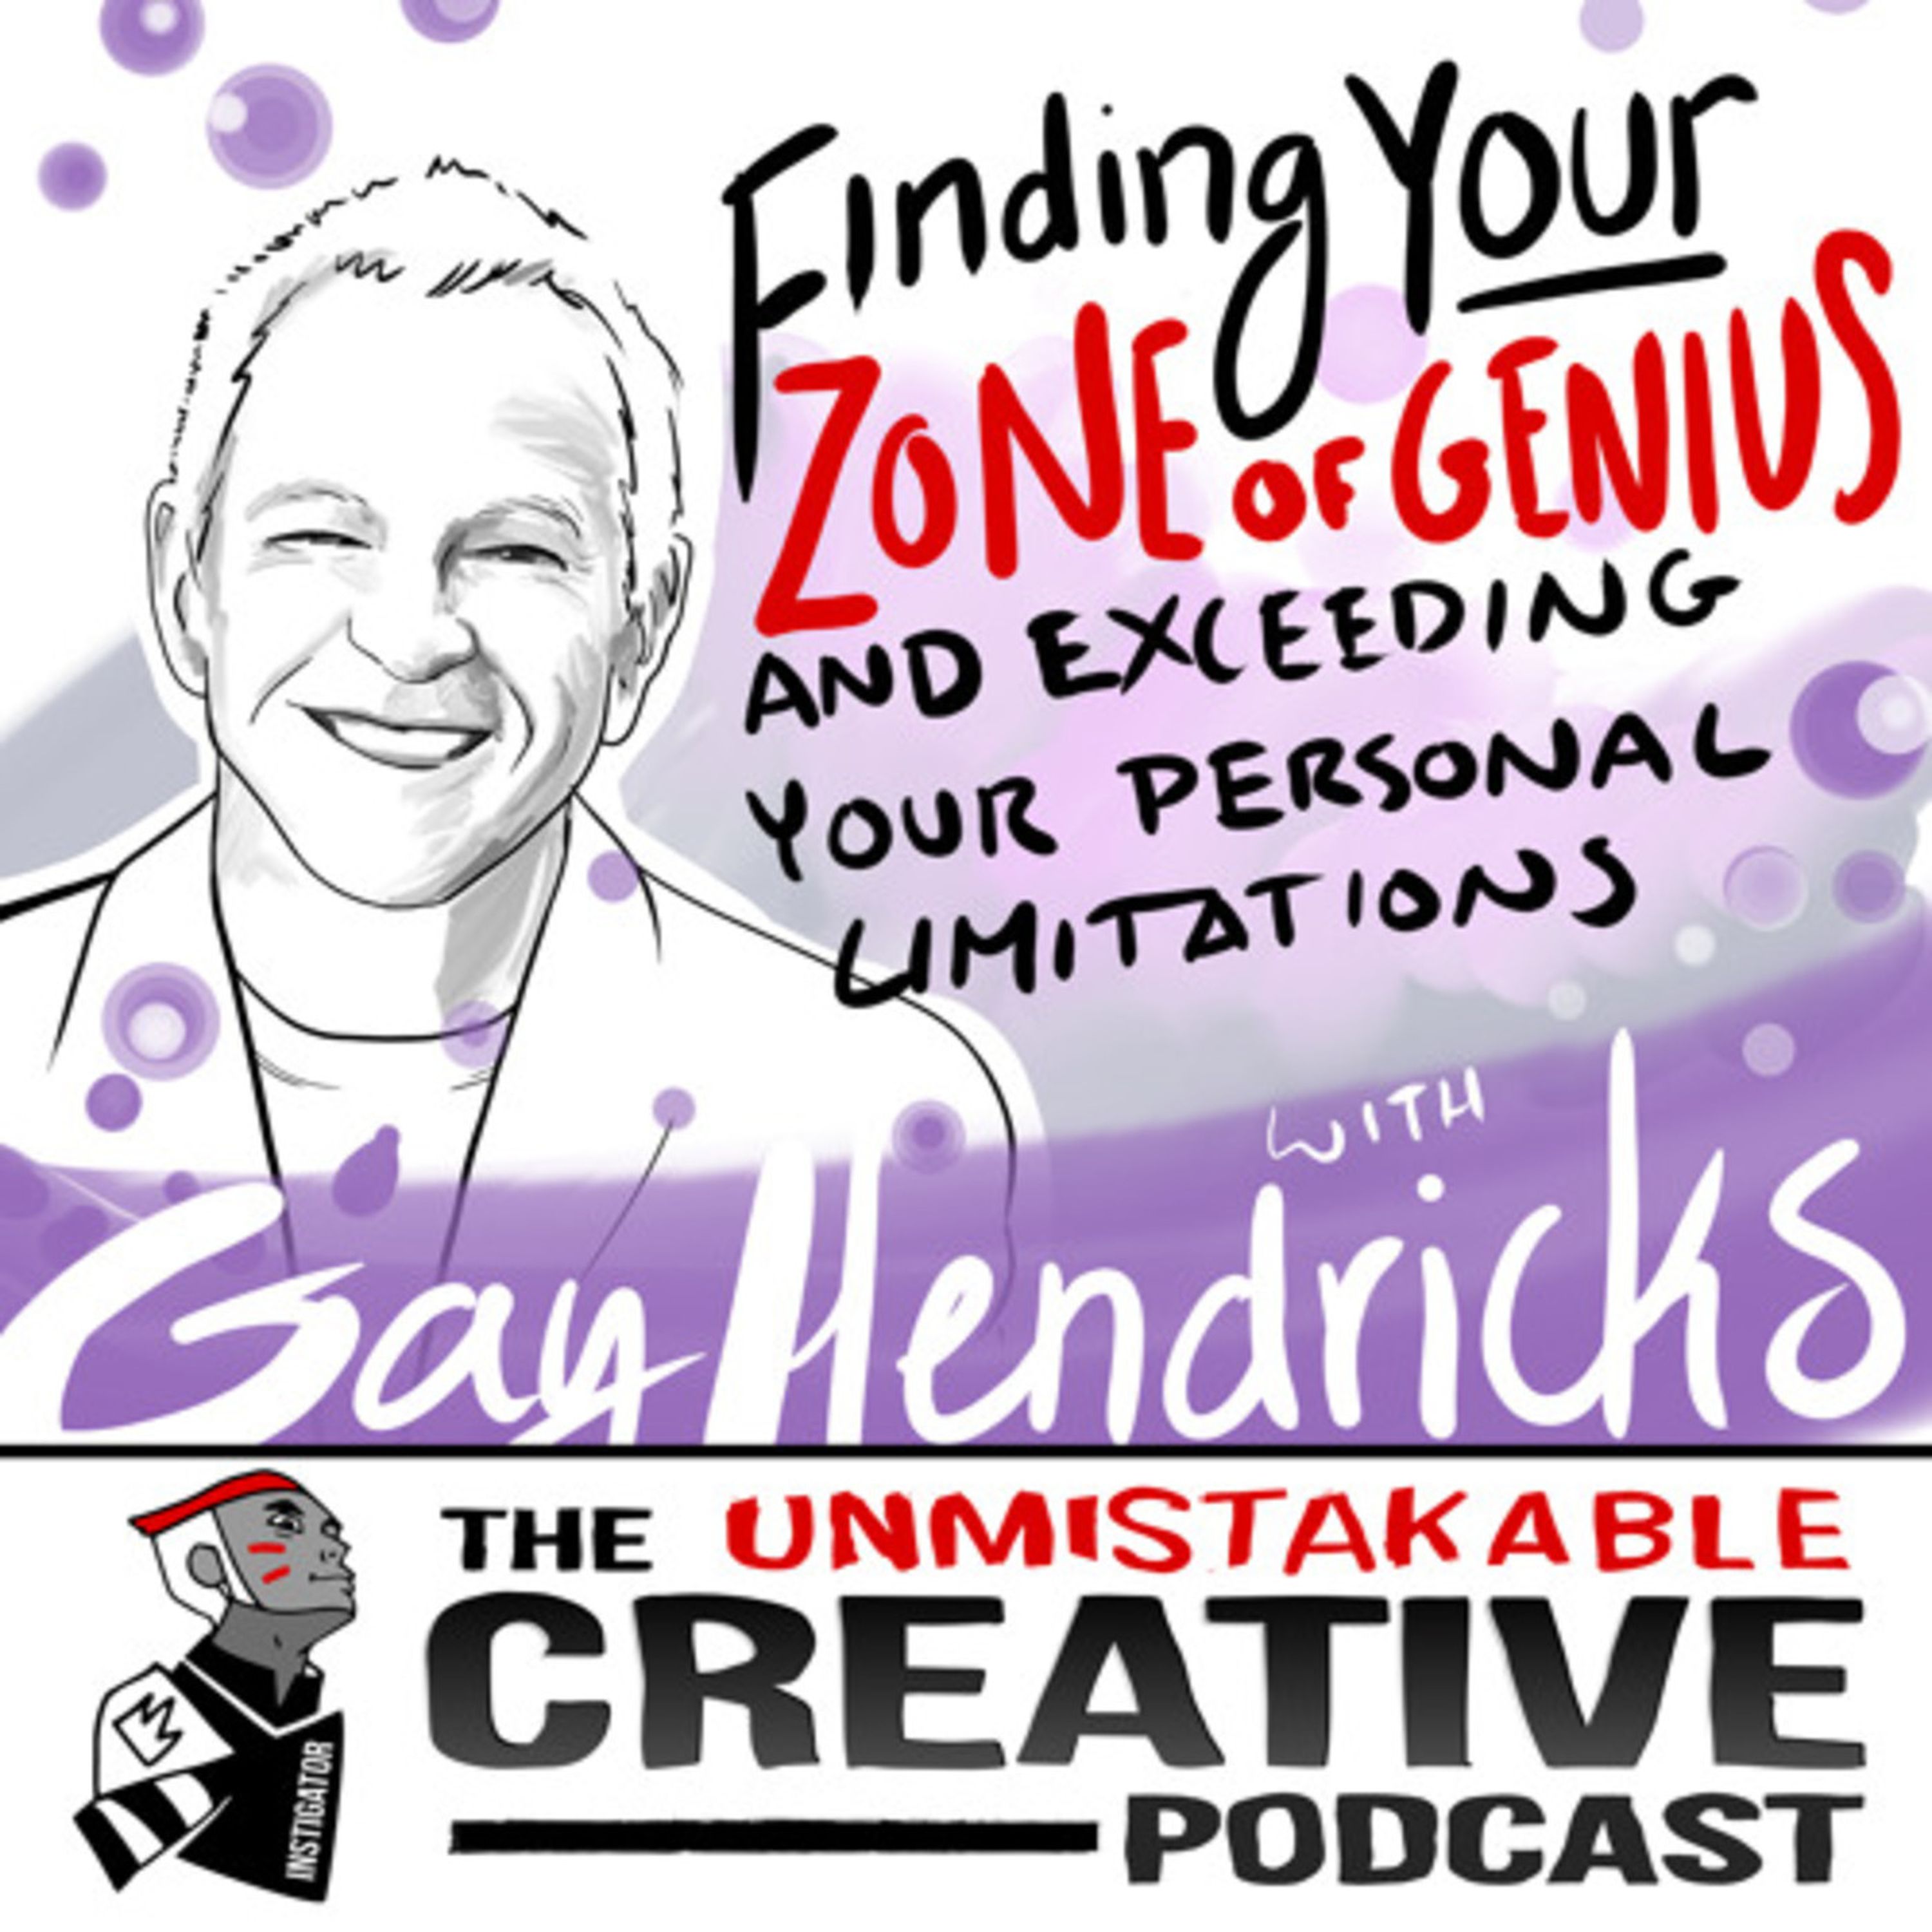 Finding Your Zone of Genius and Exceeding Your Personal Limitations with Gay Hendricks